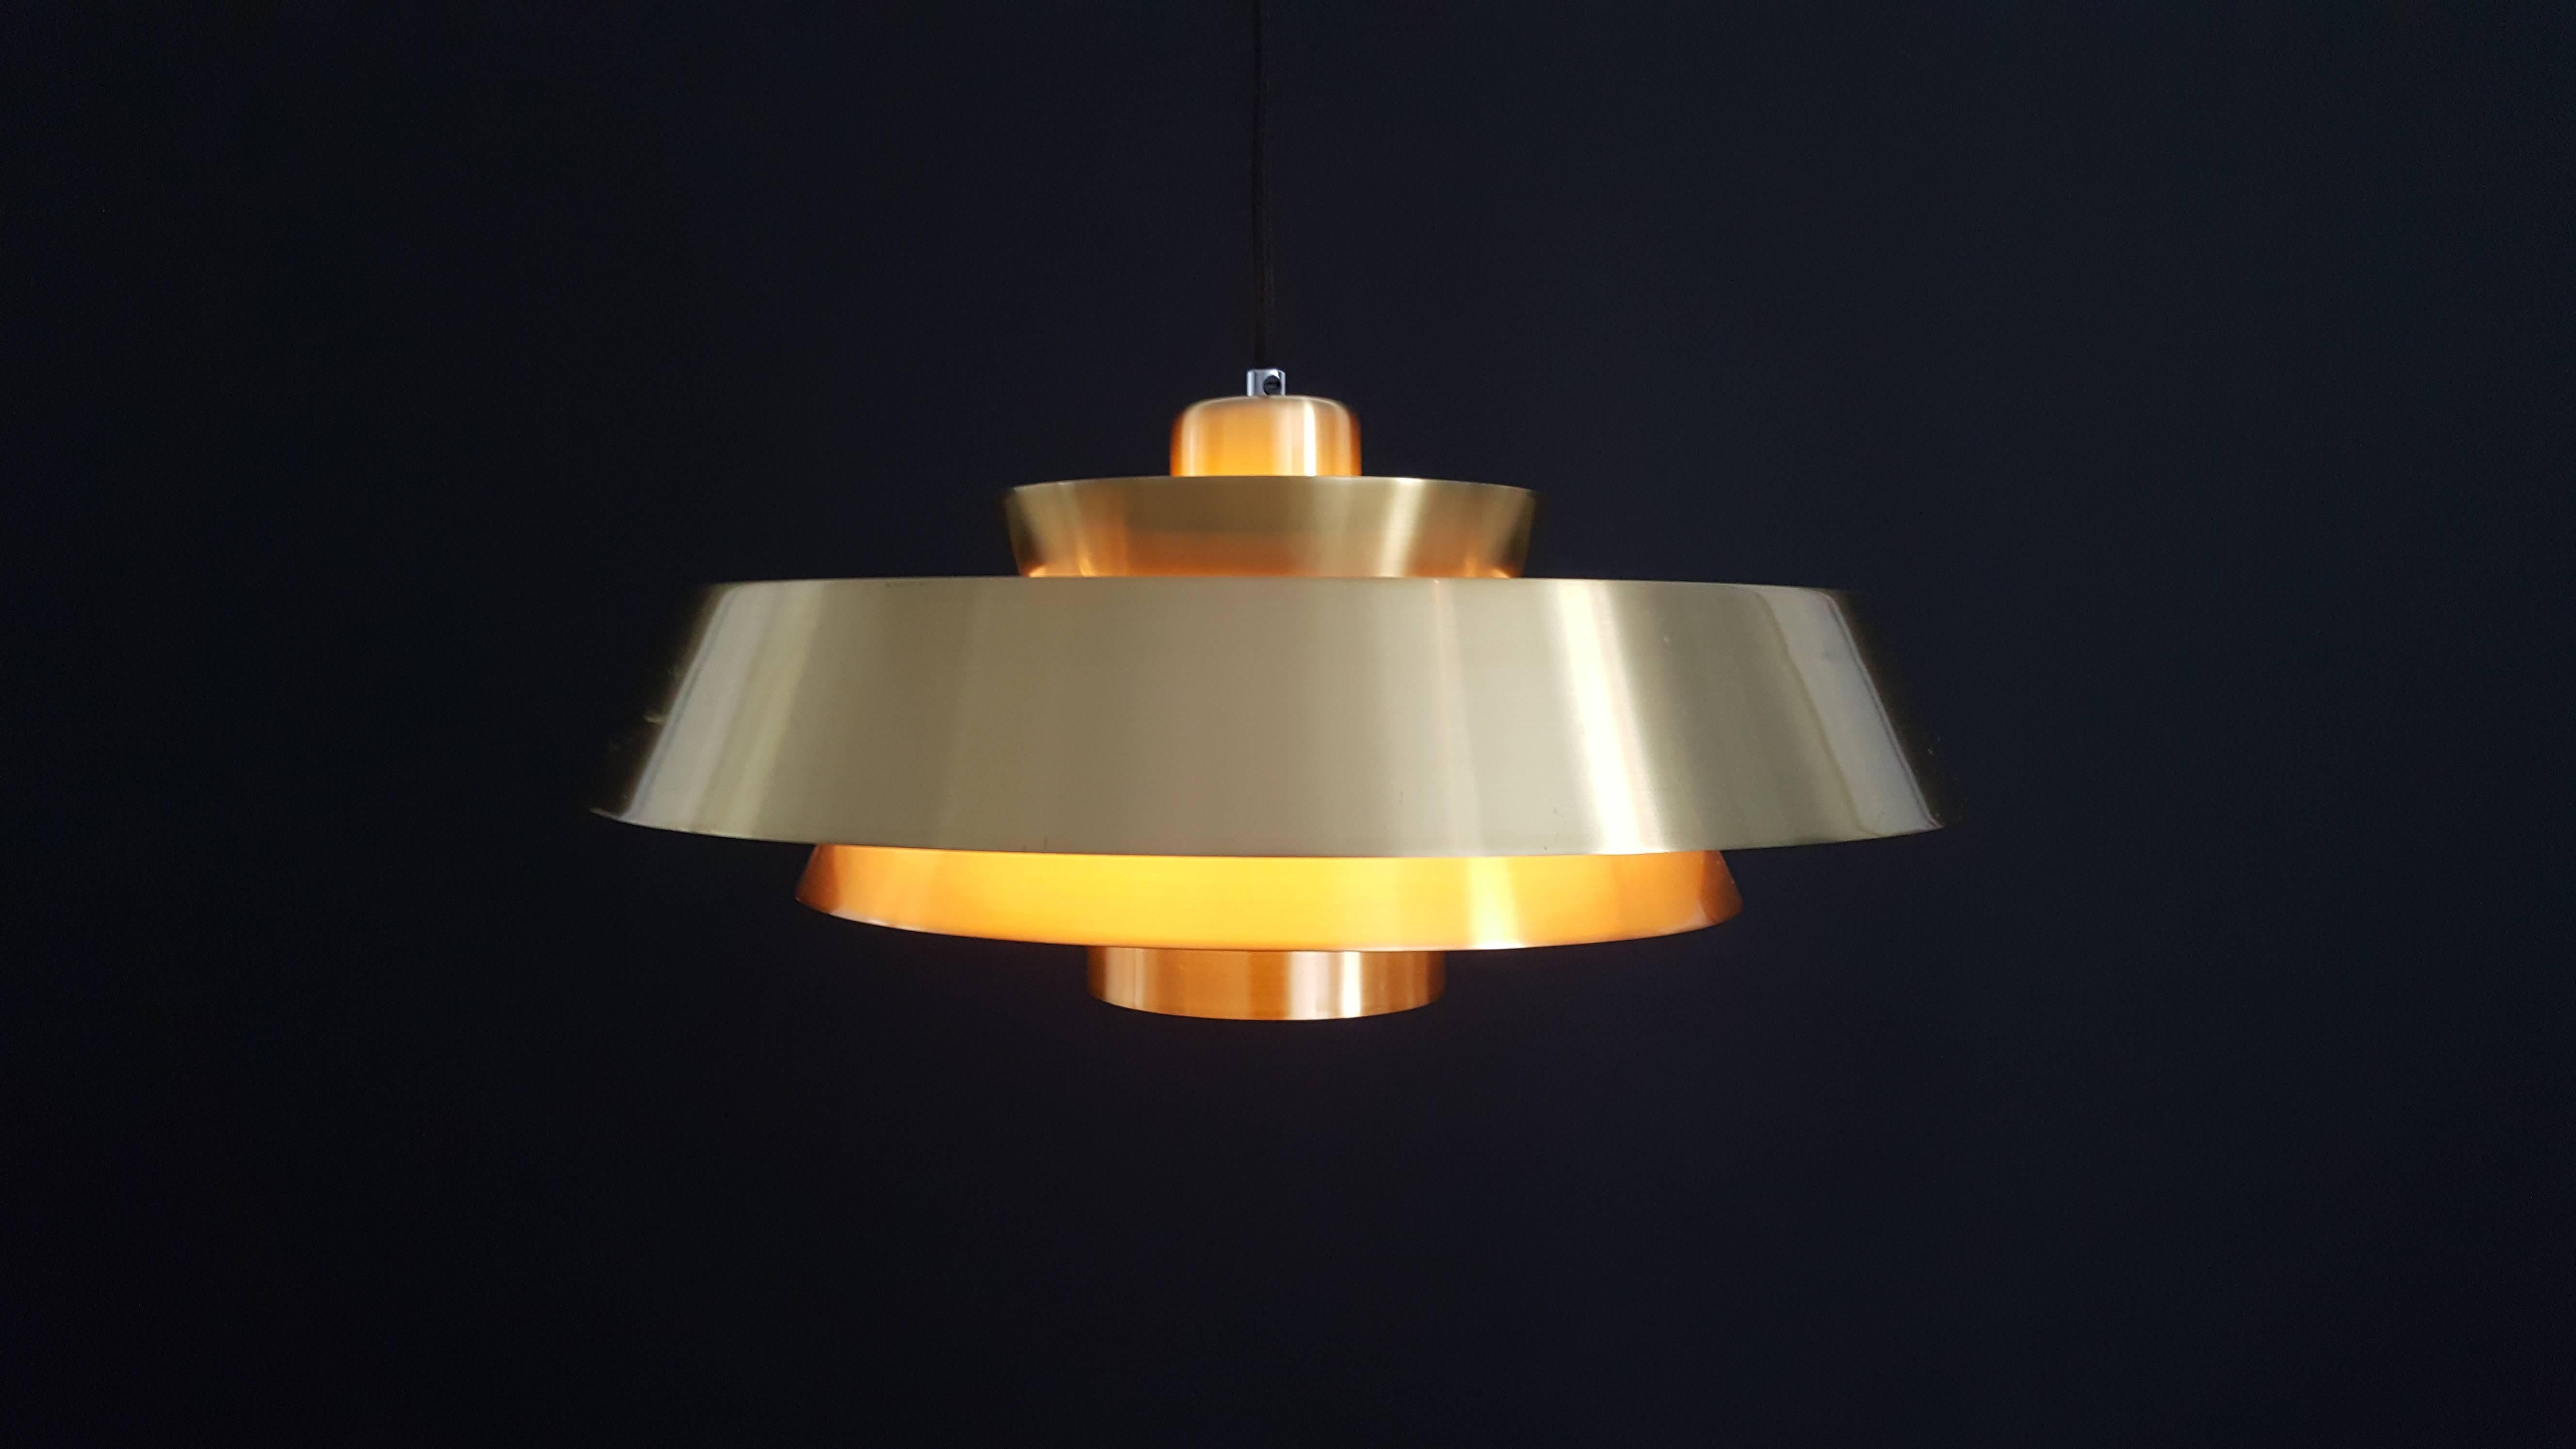 Jo Hammerborg Nova pendant light in brass for Fog & Mørup, Denmark, 1960s.

This vintage modernist light fixture is crafted in brass in three round, graduated tiers.

In 1957 Jo Hammerborg became head of design at Fog & Mørup. His incumbency